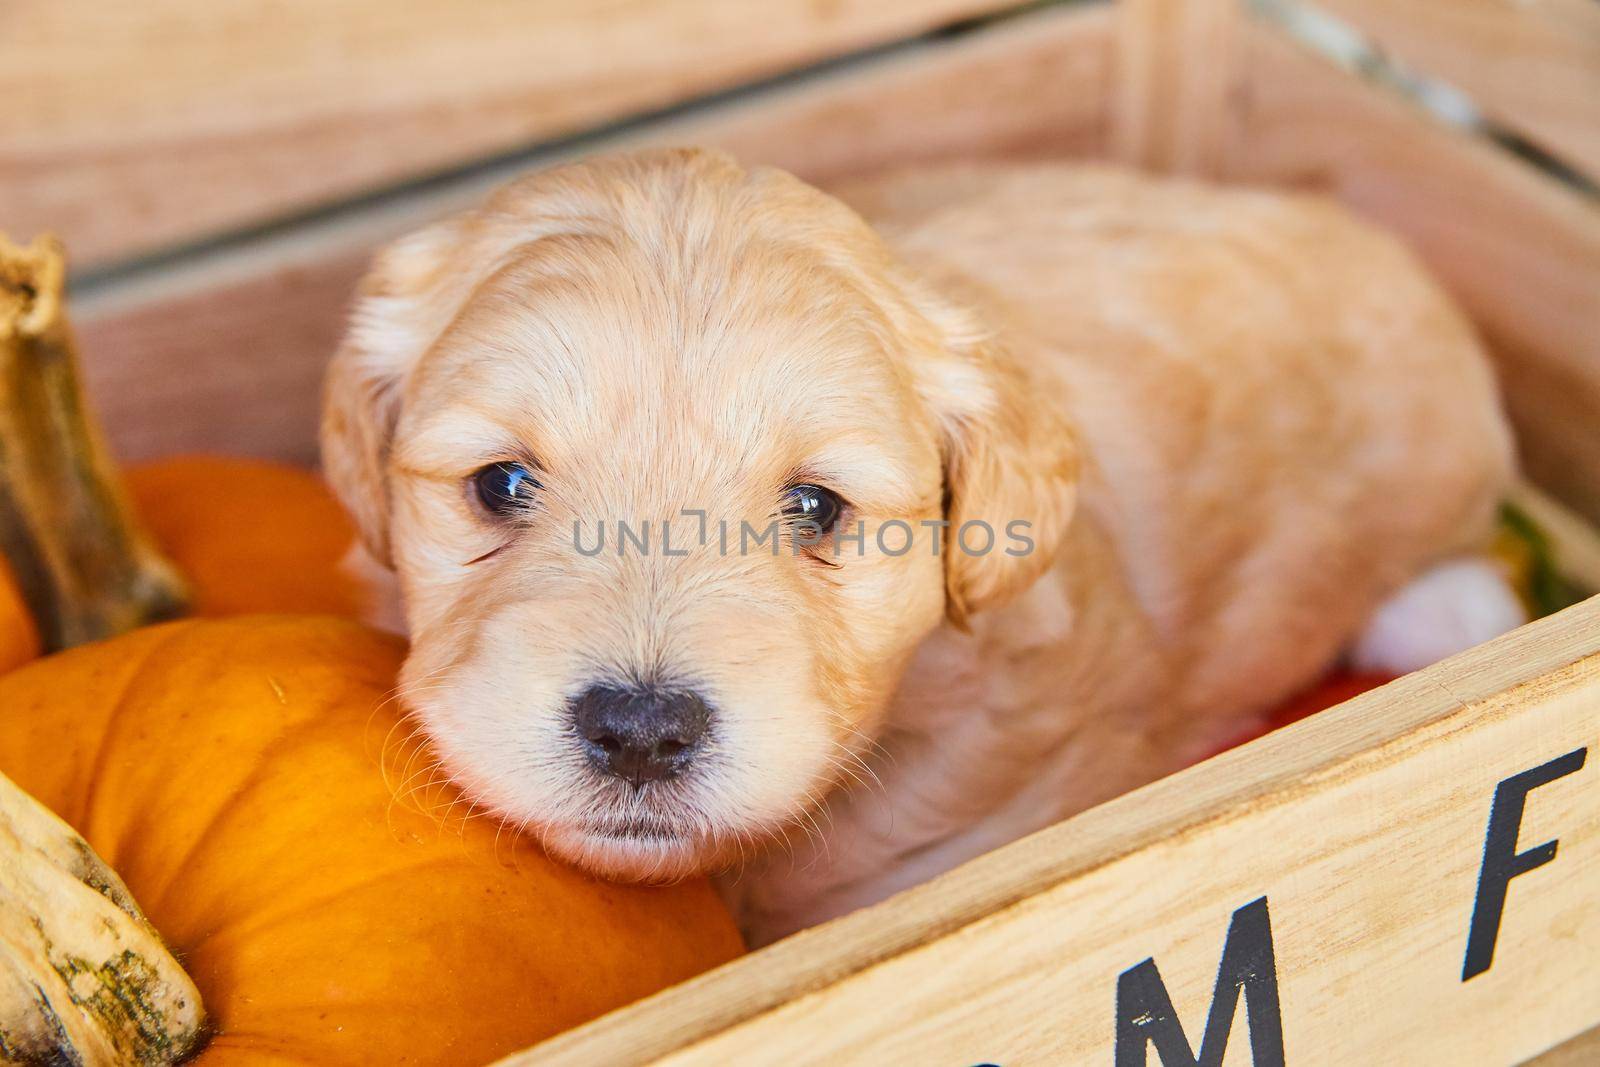 Image of Adorable golden retriever puppy in wood box with fall pumpkins